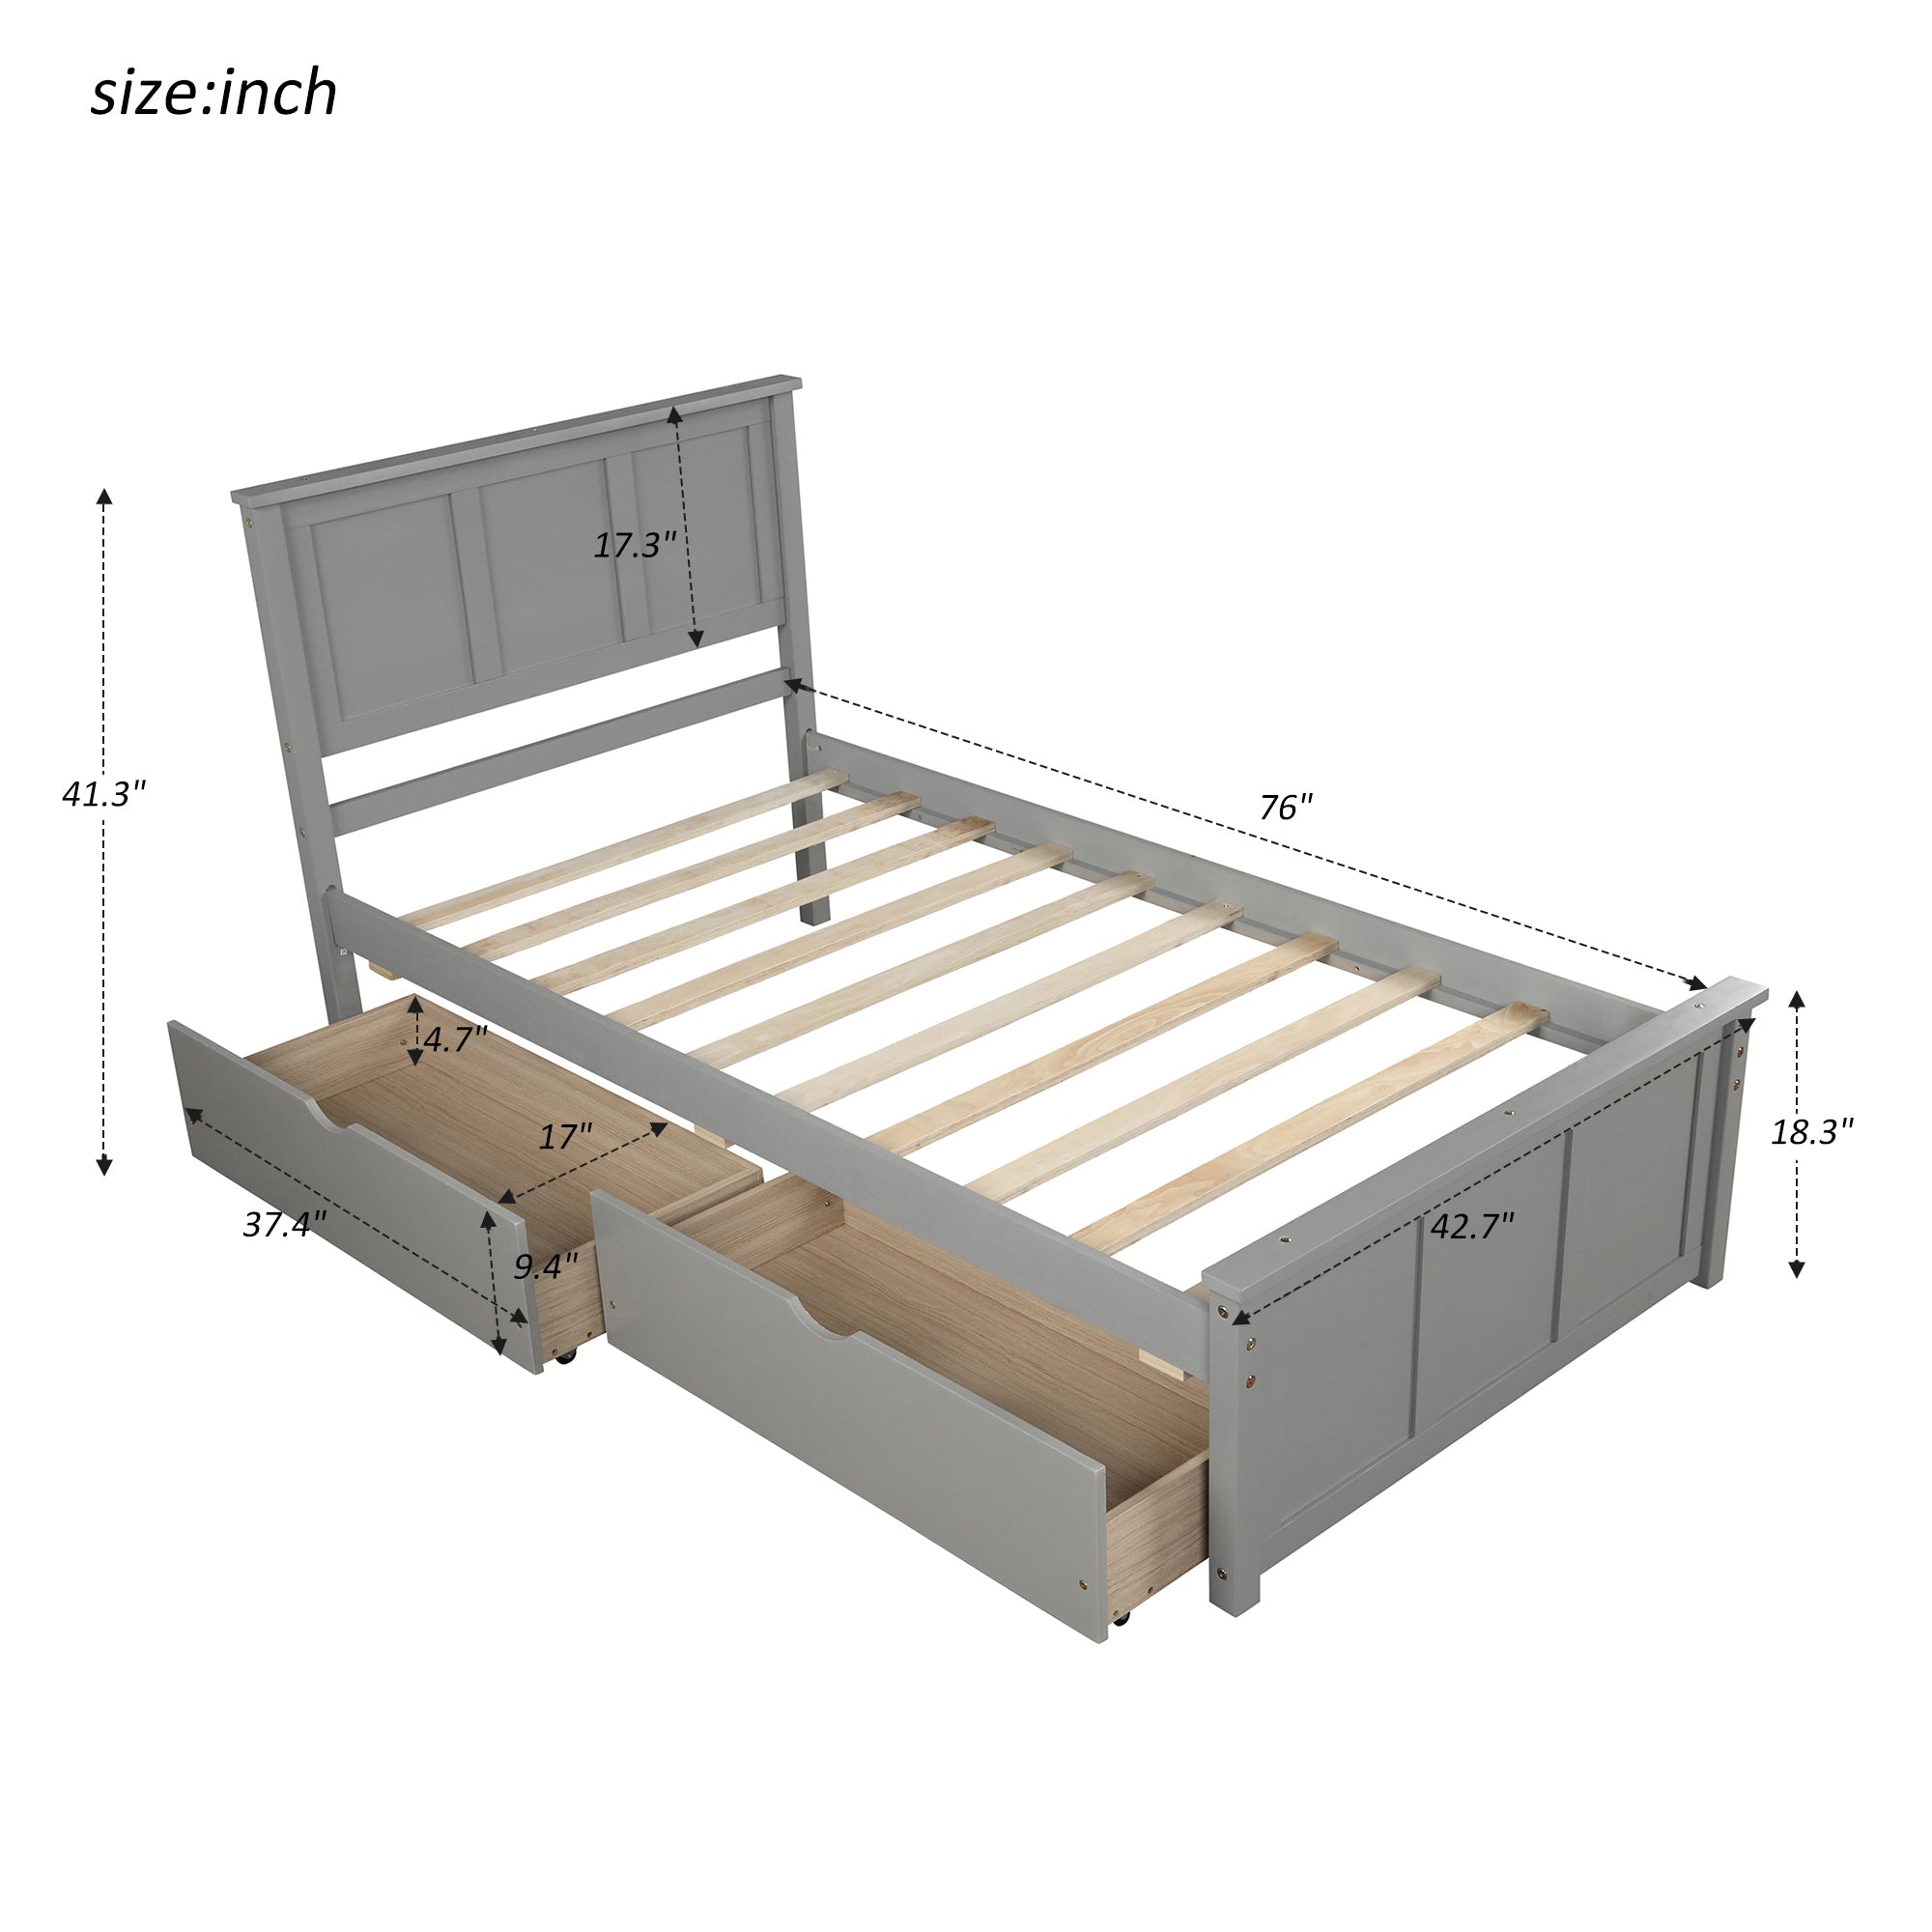 New SKU: WF283062AAE - Gray Twin Platform Storage Bed with 2 Drawers on Wheels - Space-Saving Solution